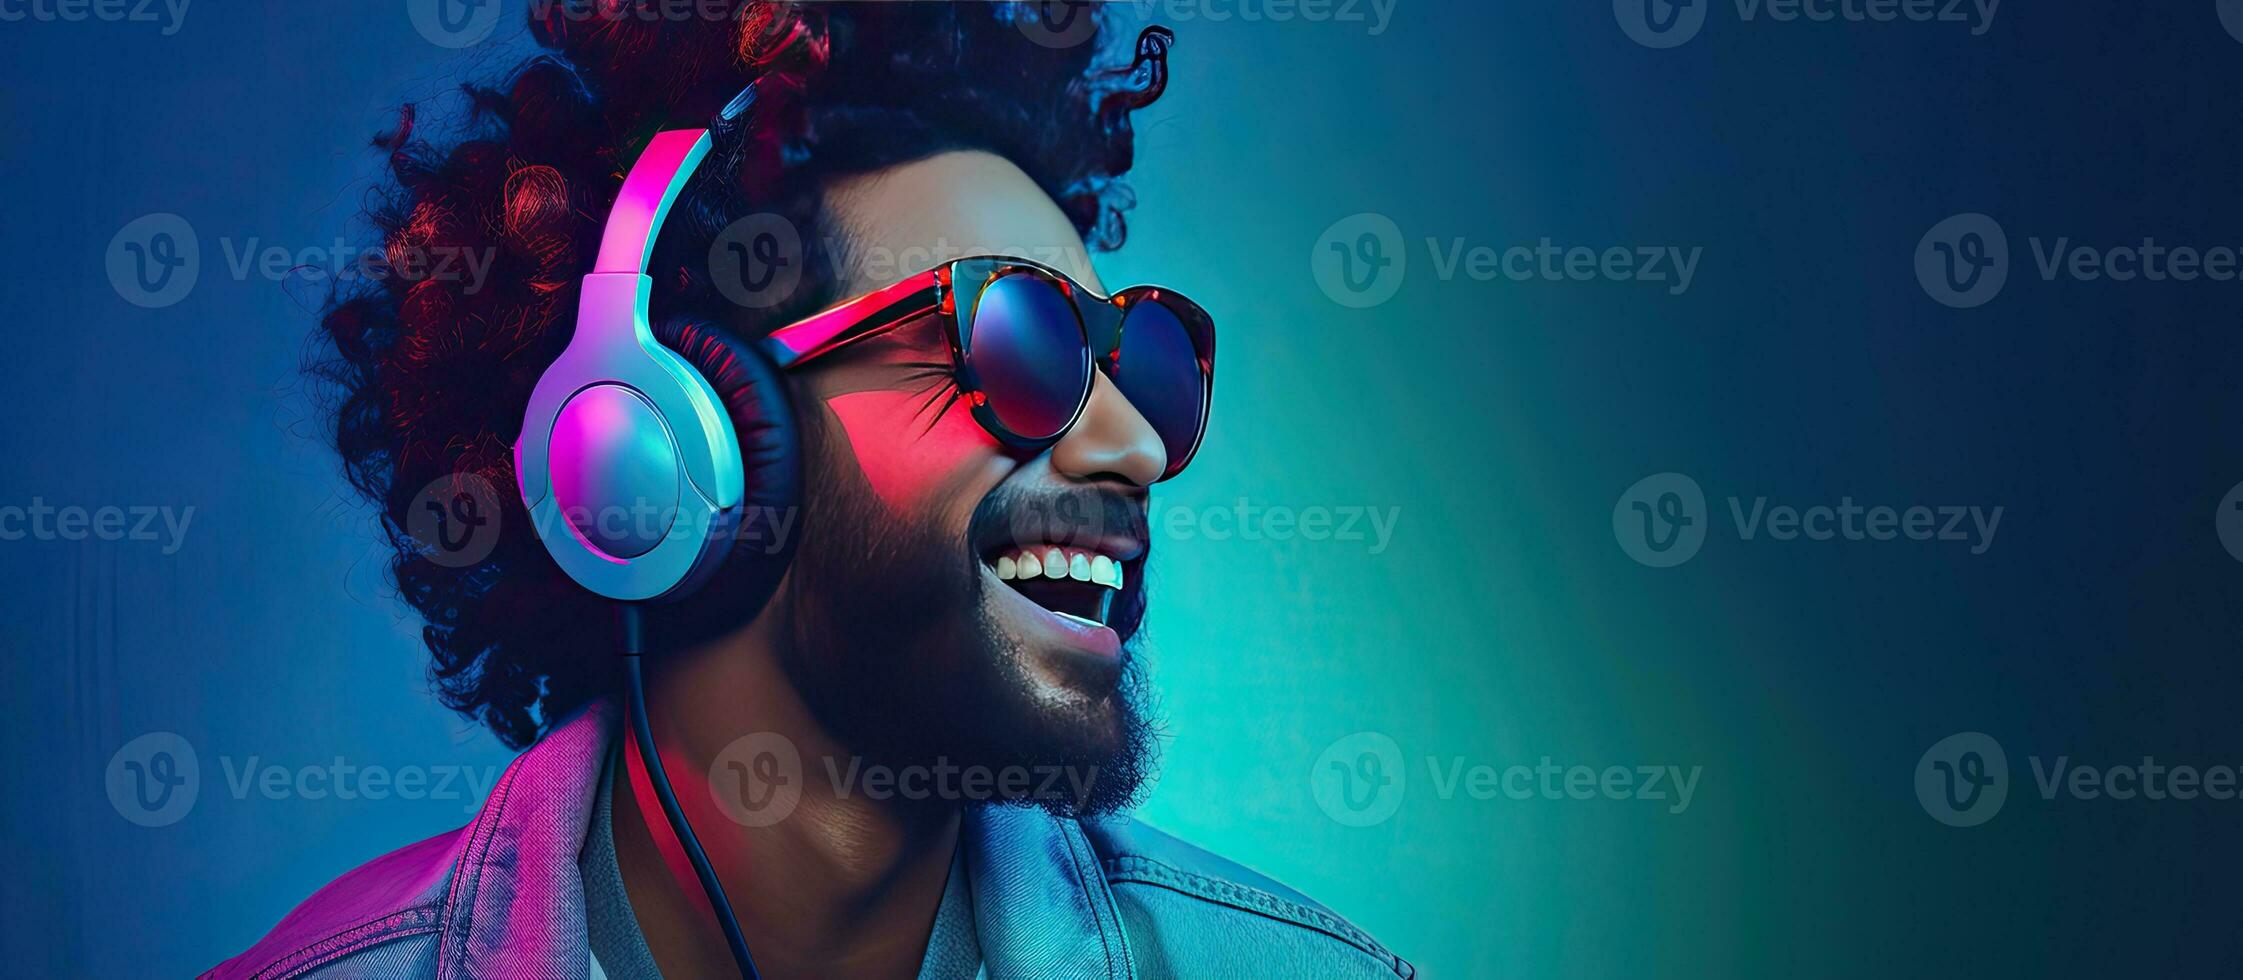 Hipster man wearing headphones dancing and singing with an open mouth smile in a portrait with a blue background and mixed neon light showcasing his fashi photo